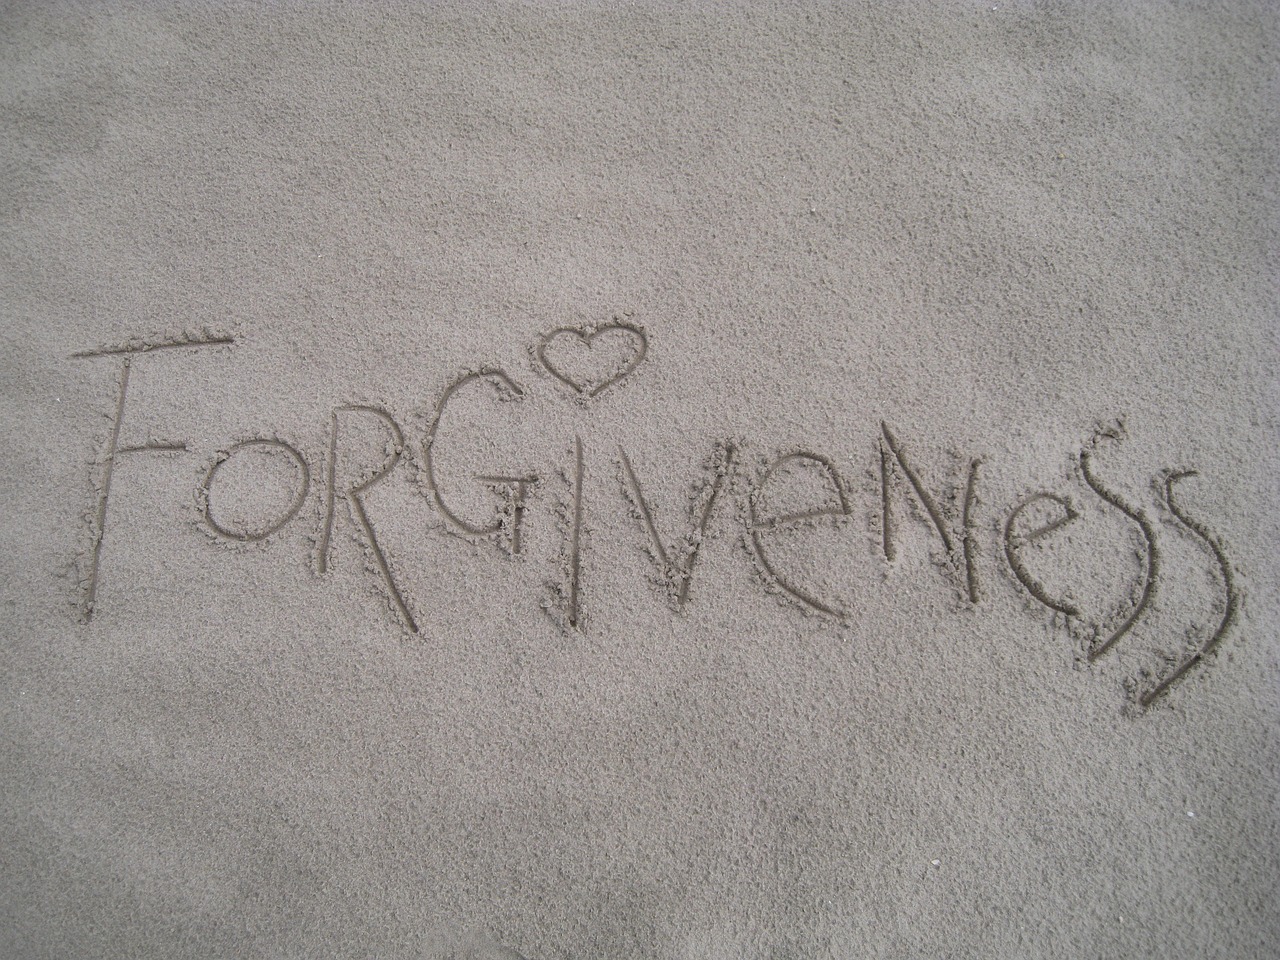 Is Forgiveness Good for Your Health and Your Life?